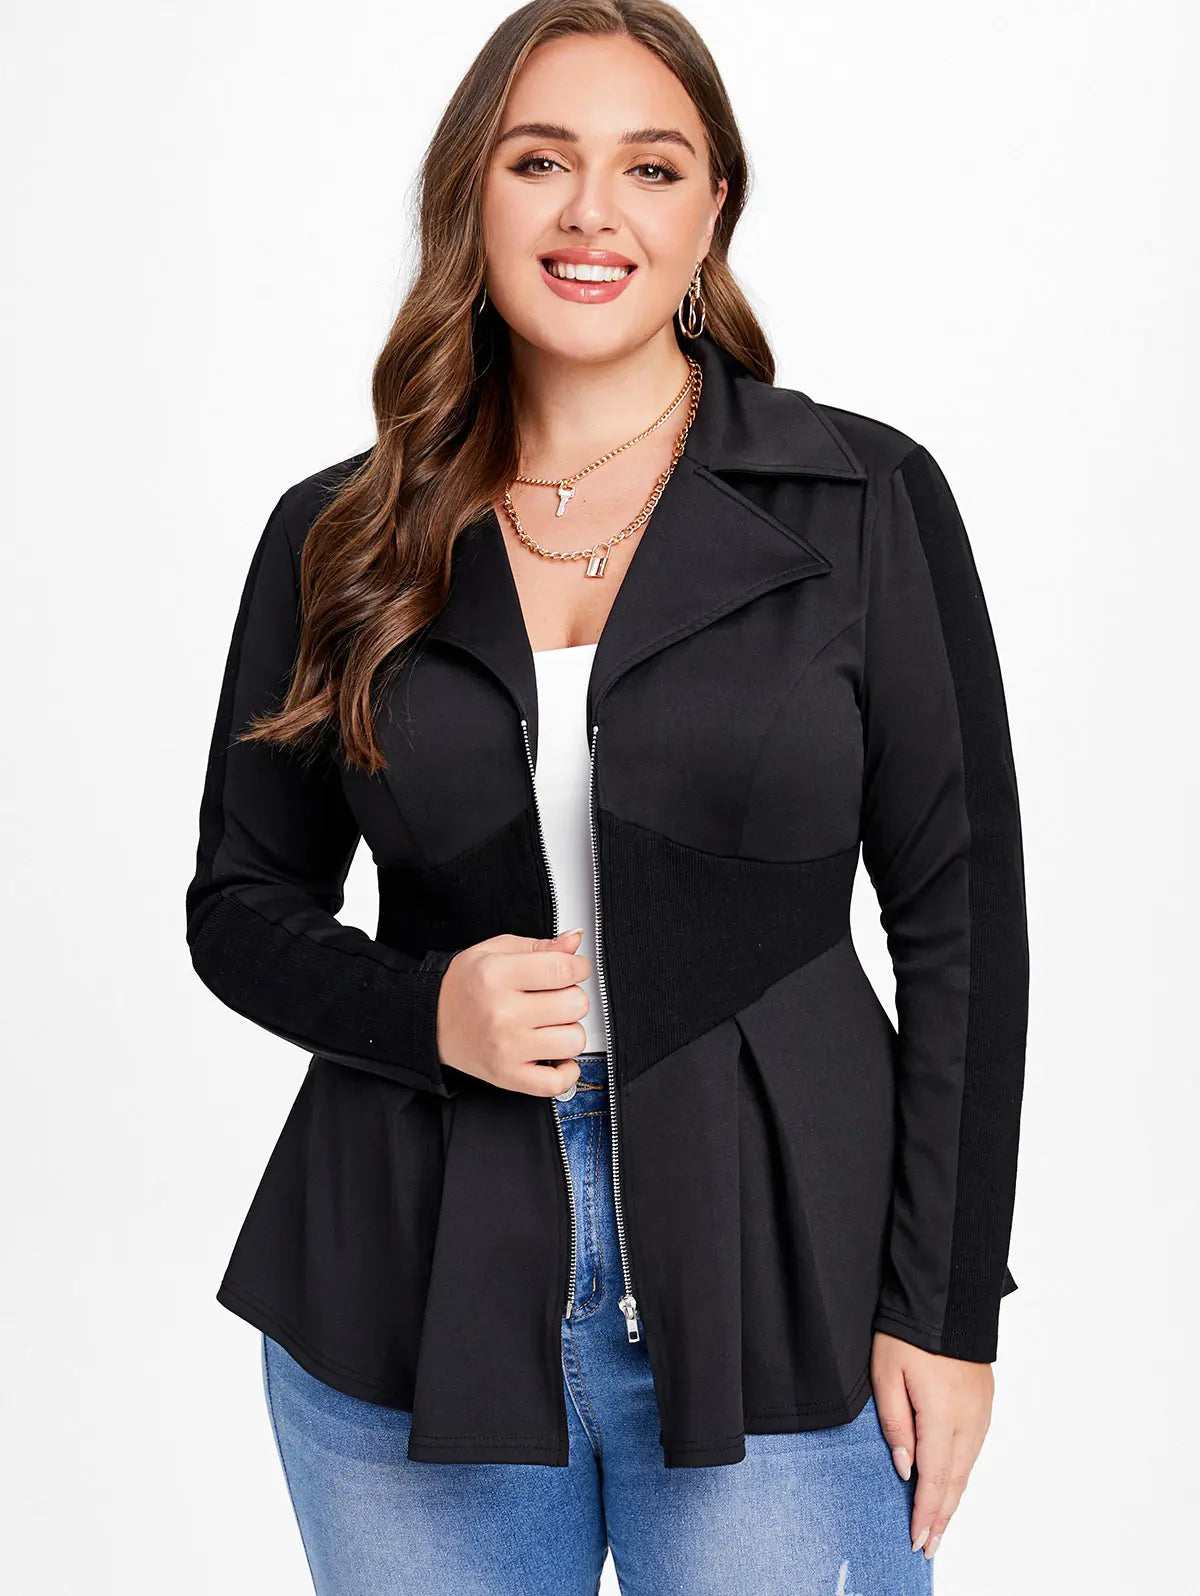 ROSEGAL Plus Size Women's Black Jacket - Fashion Ribbed Panel, Zipper Turn-Down Collar Coat, Casual Outerwear Top